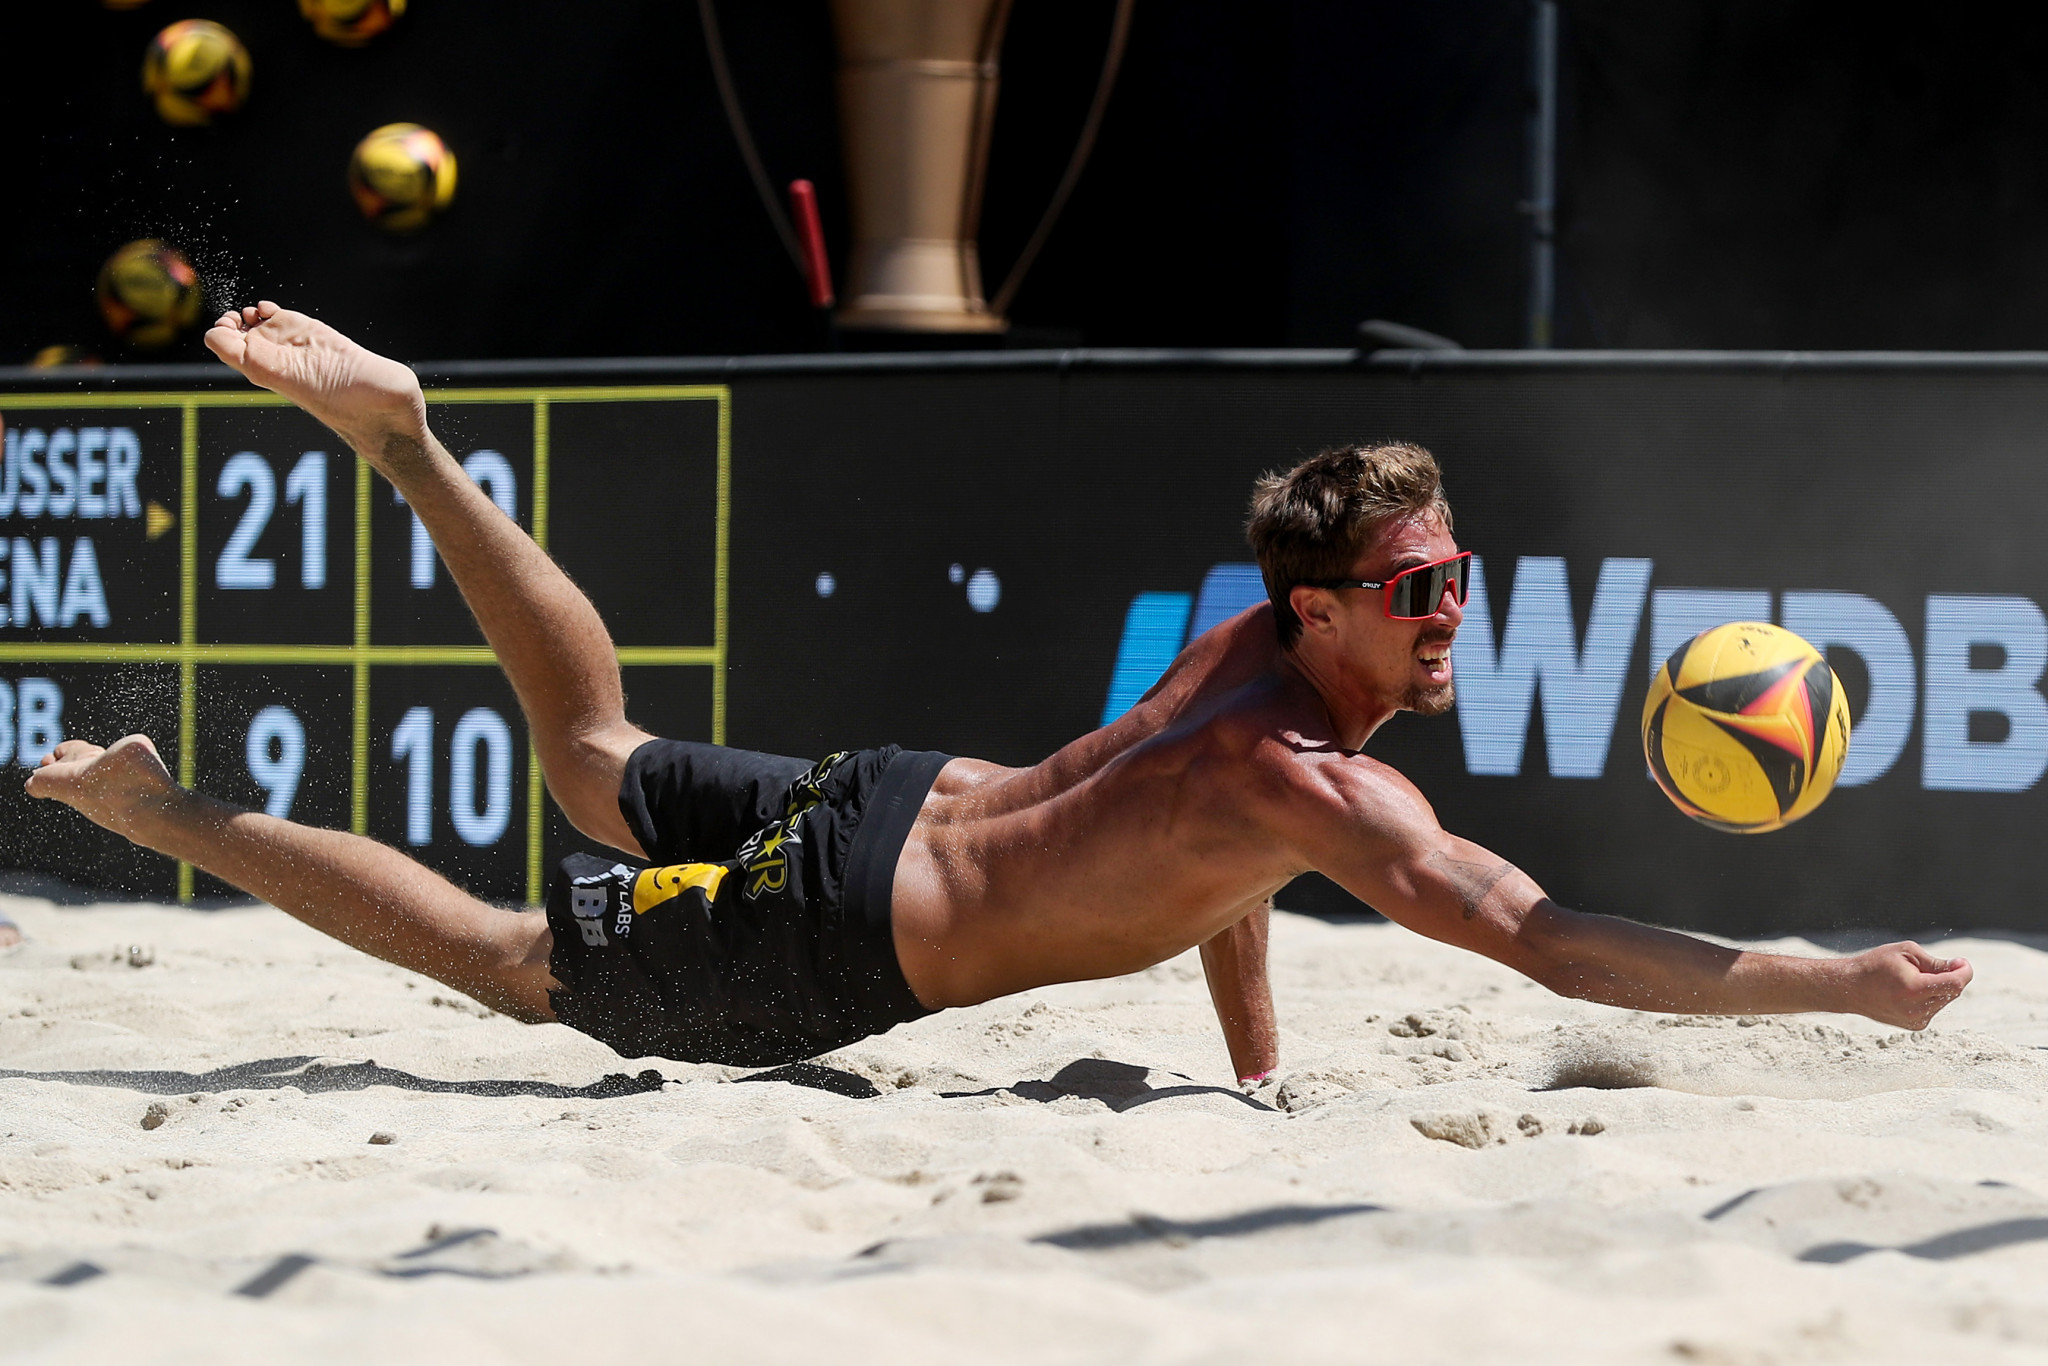 United States beach volleyball player Taylor Crabb was ruled out the Olympics after contracting COVID-19 ©Getty Images